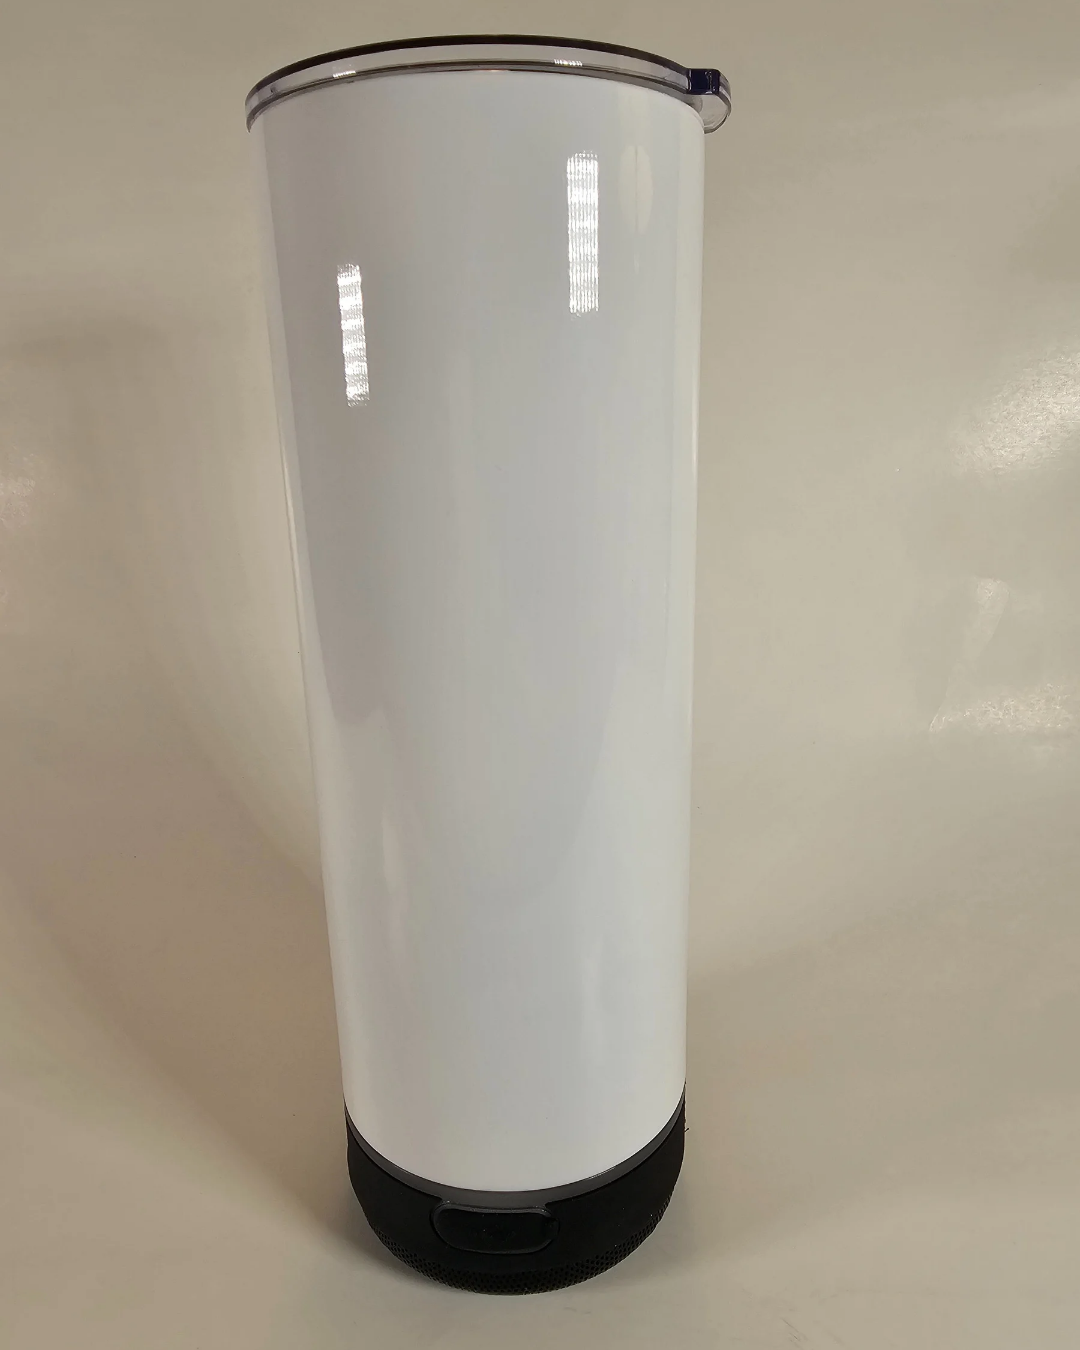 image show the tumbler with the black speak attached